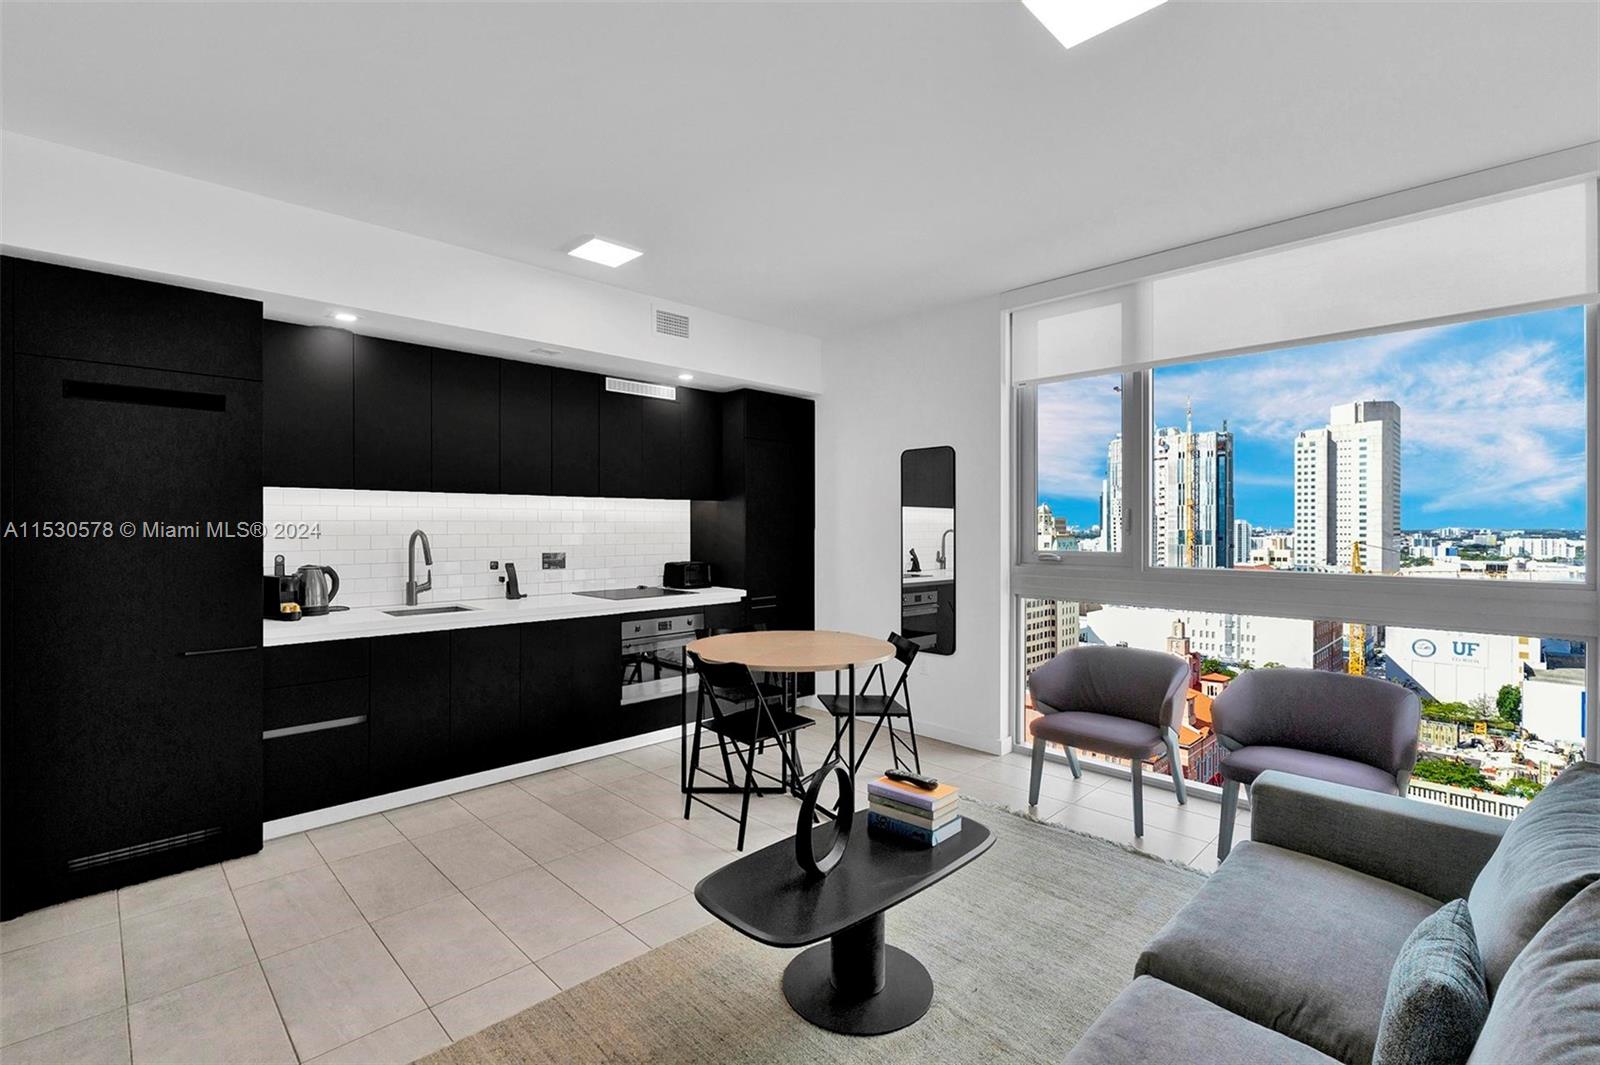 A beautiful, fully furnished, turnkey 2-bedroom unit located in the heart of Downtown Miami. It boasts modern decor and stunning views of downtown Miami. NO rental restrictions!!! Great opportunity for investors. The location is excellent, just one block from Bayfront Park and directly across from the First Street Metromover station. The building is a high-rise with fantastic amenities, including a beautiful swimming pool, gym, restaurant, bars, rooftop residence lounge, etc. Valet parking and 24/7 security. Come to see it now!